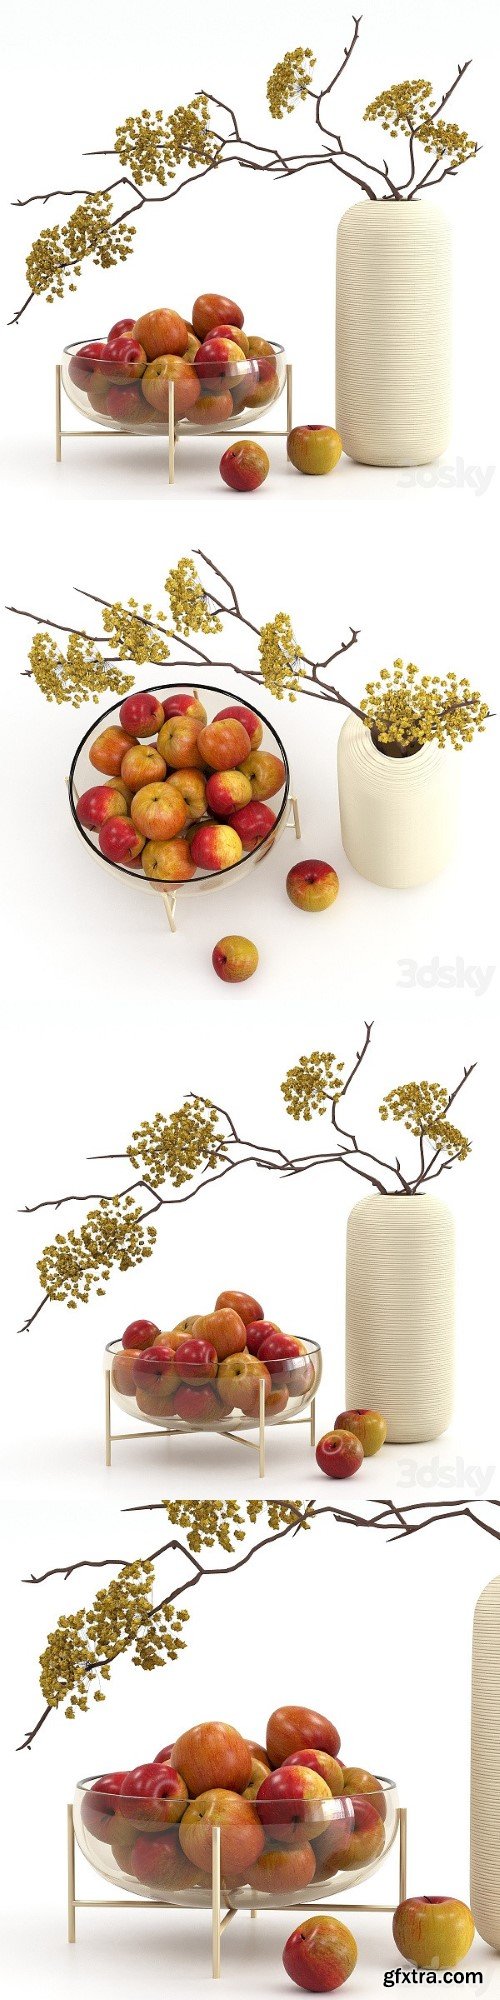 Vase With Apples 1